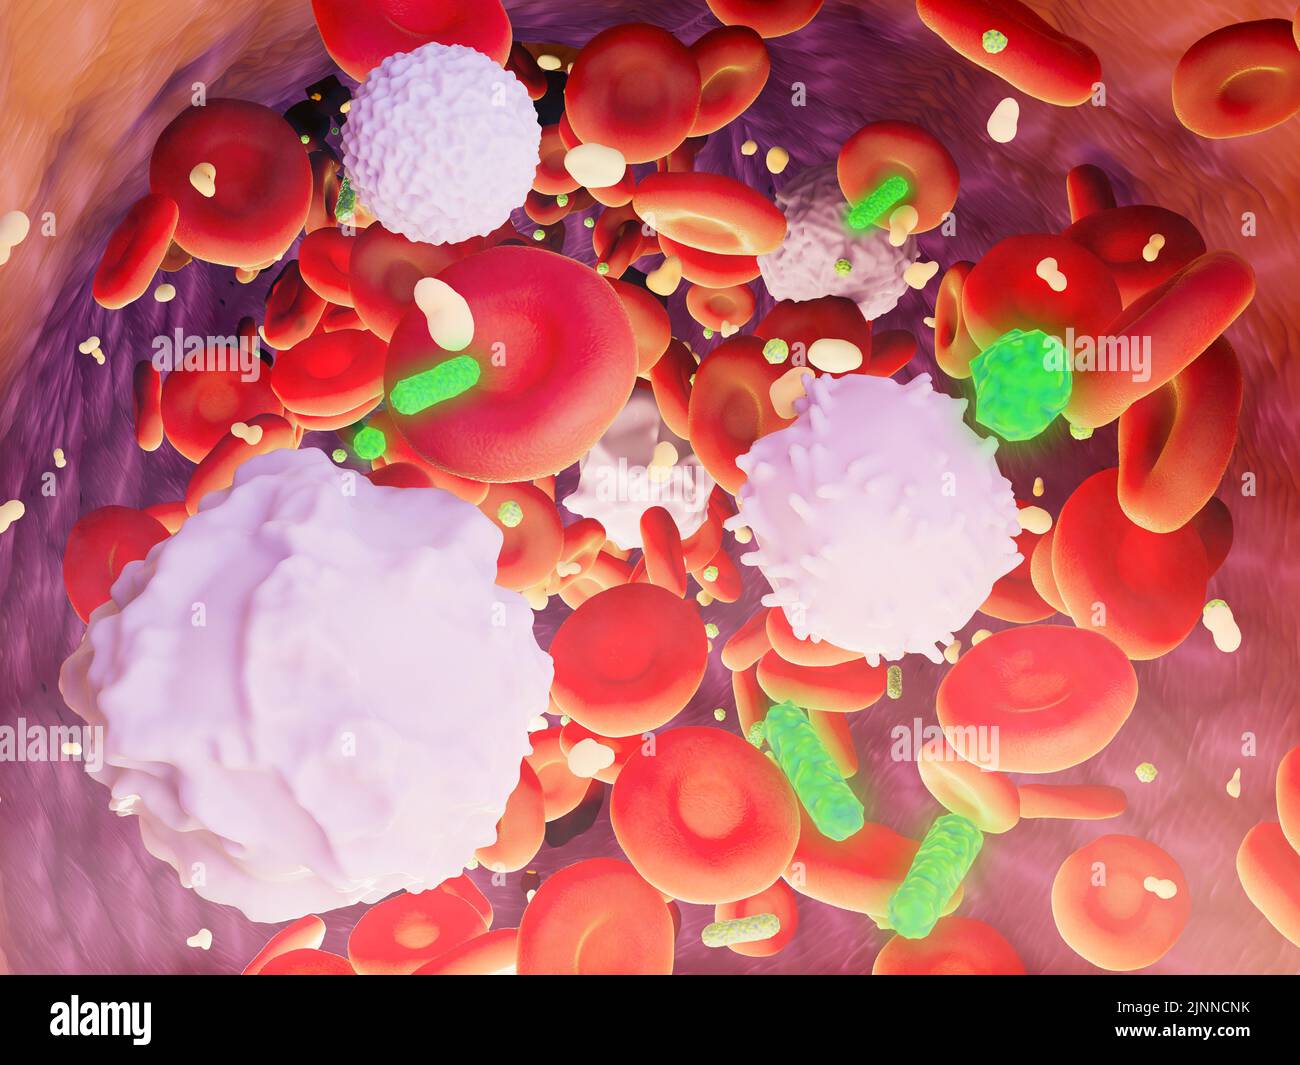 Blood cells in a blood vessel with bacteria, illustration Stock Photo